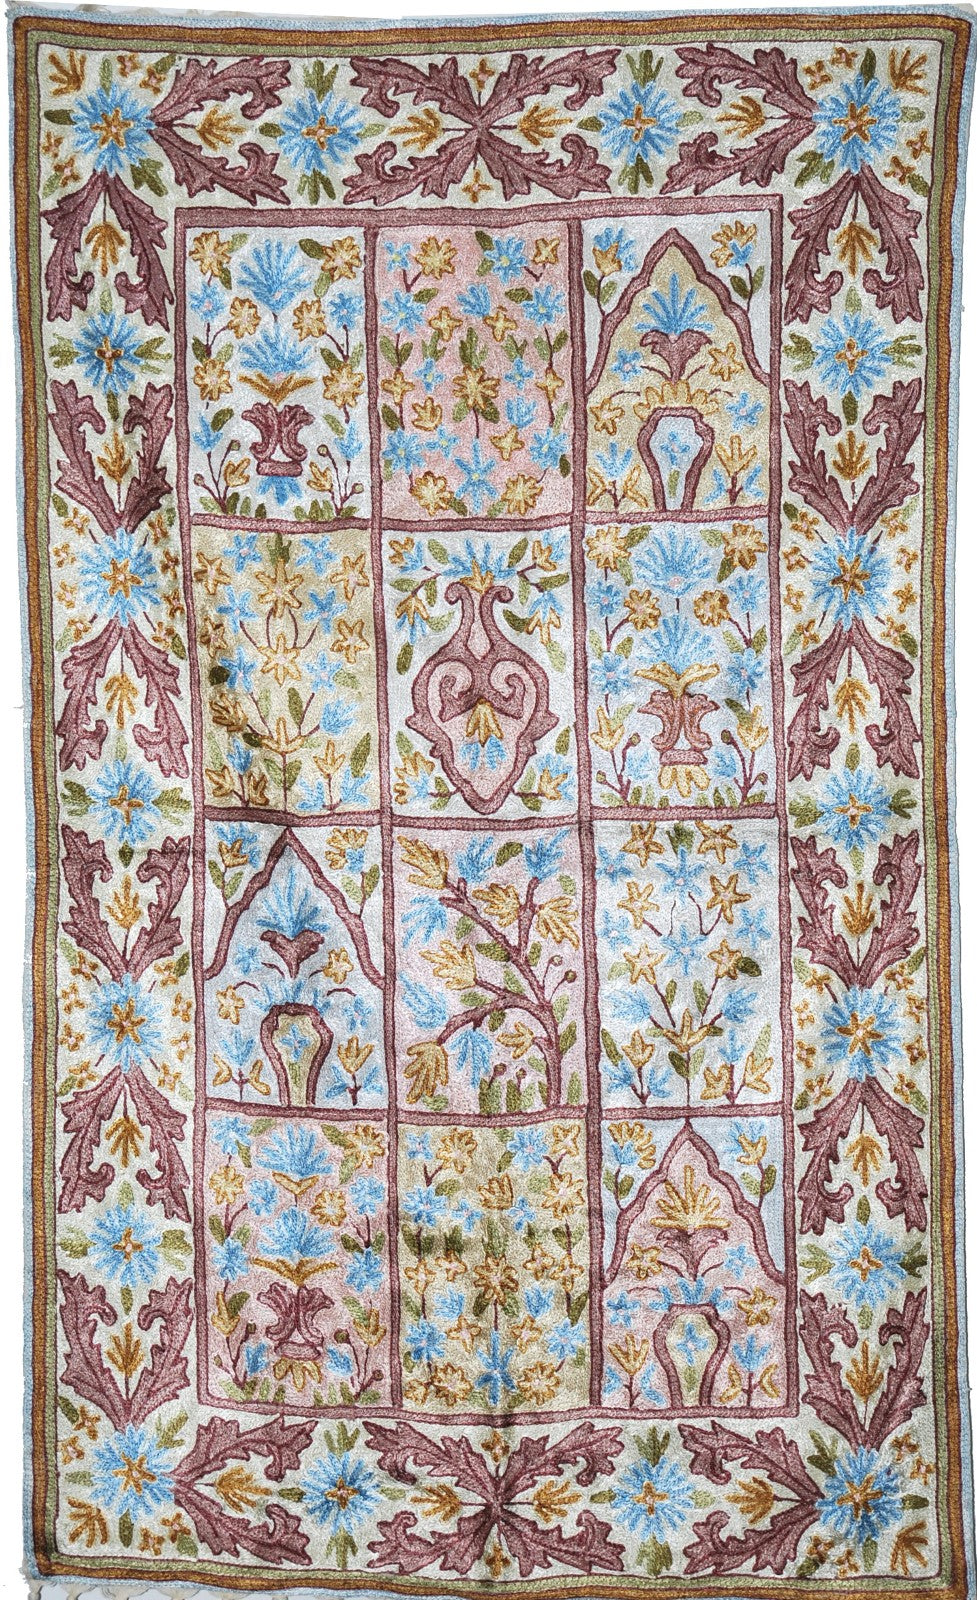 ChainStitch Tapestry Silk Area Rug, Multicolor Embroidery 2.5x4 feet #CWR10109